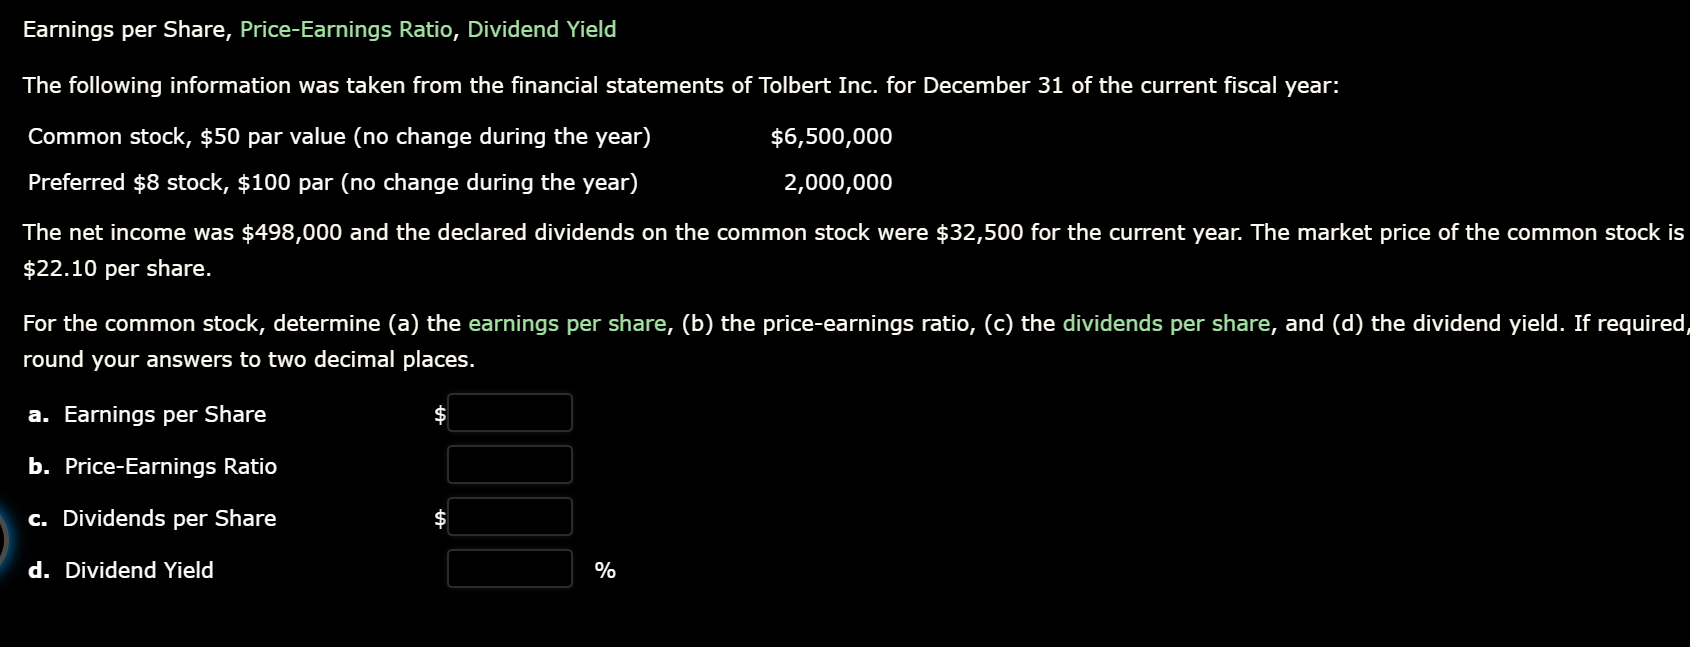 Earnings per Share, Price-Earnings Ratio, Dividend Yield
The following information was taken from the financial statements of Tolbert Inc. for December 31 of the current fiscal year:
Common stock, $50 par value (no change during the year)
Preferred $8 stock, $100 par (no change during the year)
$6,500,000
2,000,000
The net income was $498,000 and the declared dividends on the common stock were $32,500 for the current year. The market price of the common stock is
$22.10 per share.
For the common stock, determine (a) the earnings per share, (b) the price-earnings ratio, (c) the dividends per share, and (d) the dividend yield. If required,
round your answers to two decimal places.
a. Earnings per Share
b. Price-Earnings Ratio
c. Dividends per Share
d. Dividend Yield
